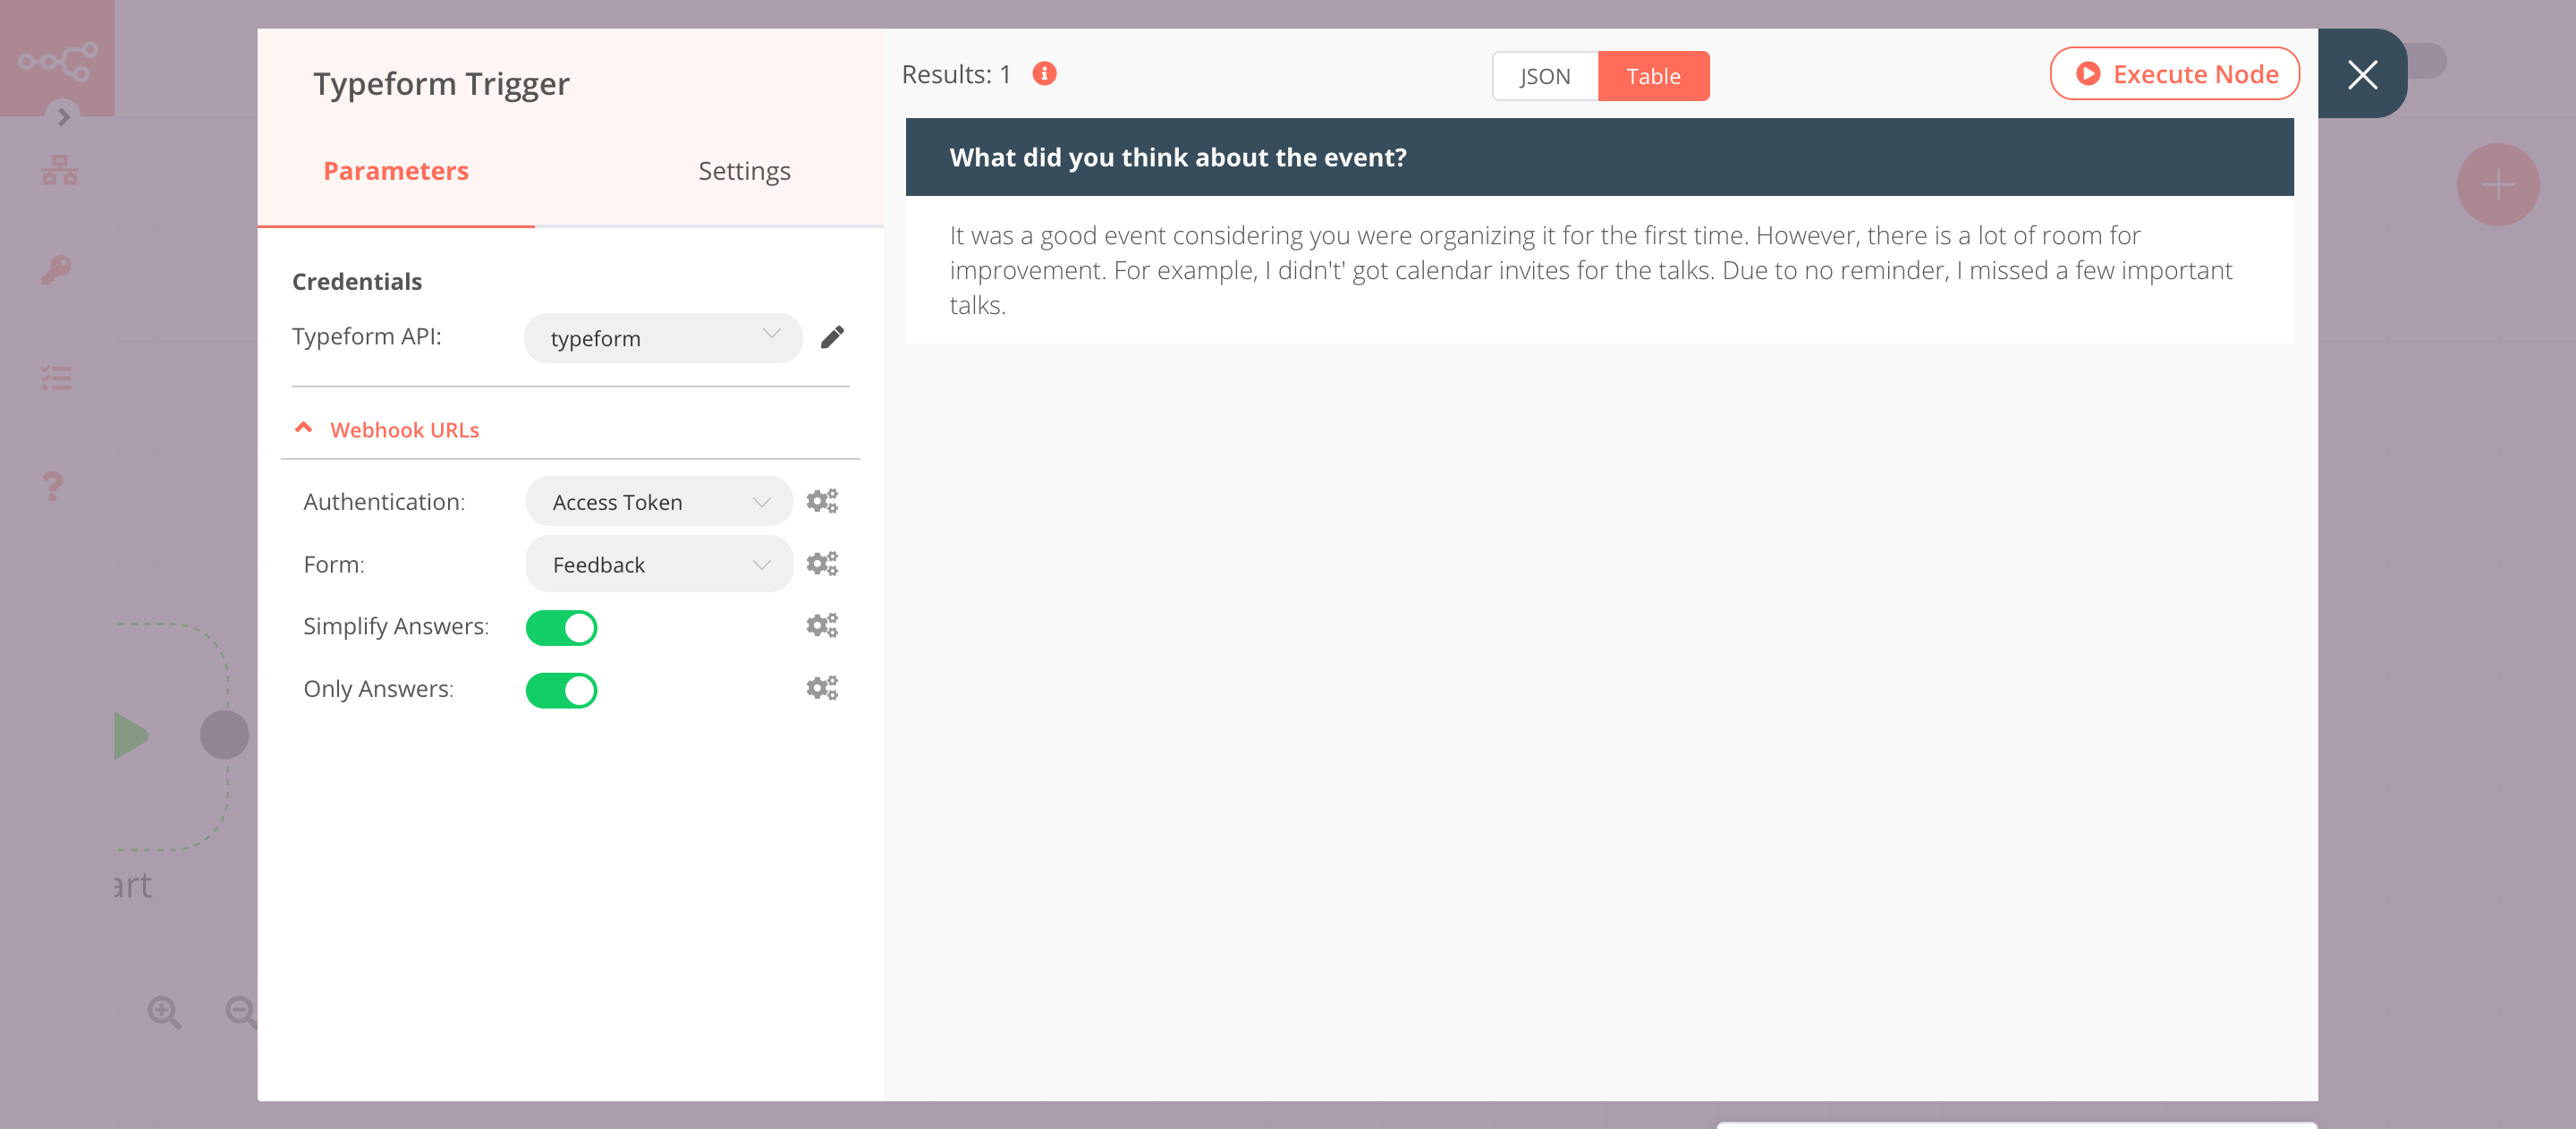 Using the Typeform Trigger node to trigger the workflow when a feedback form is submitted